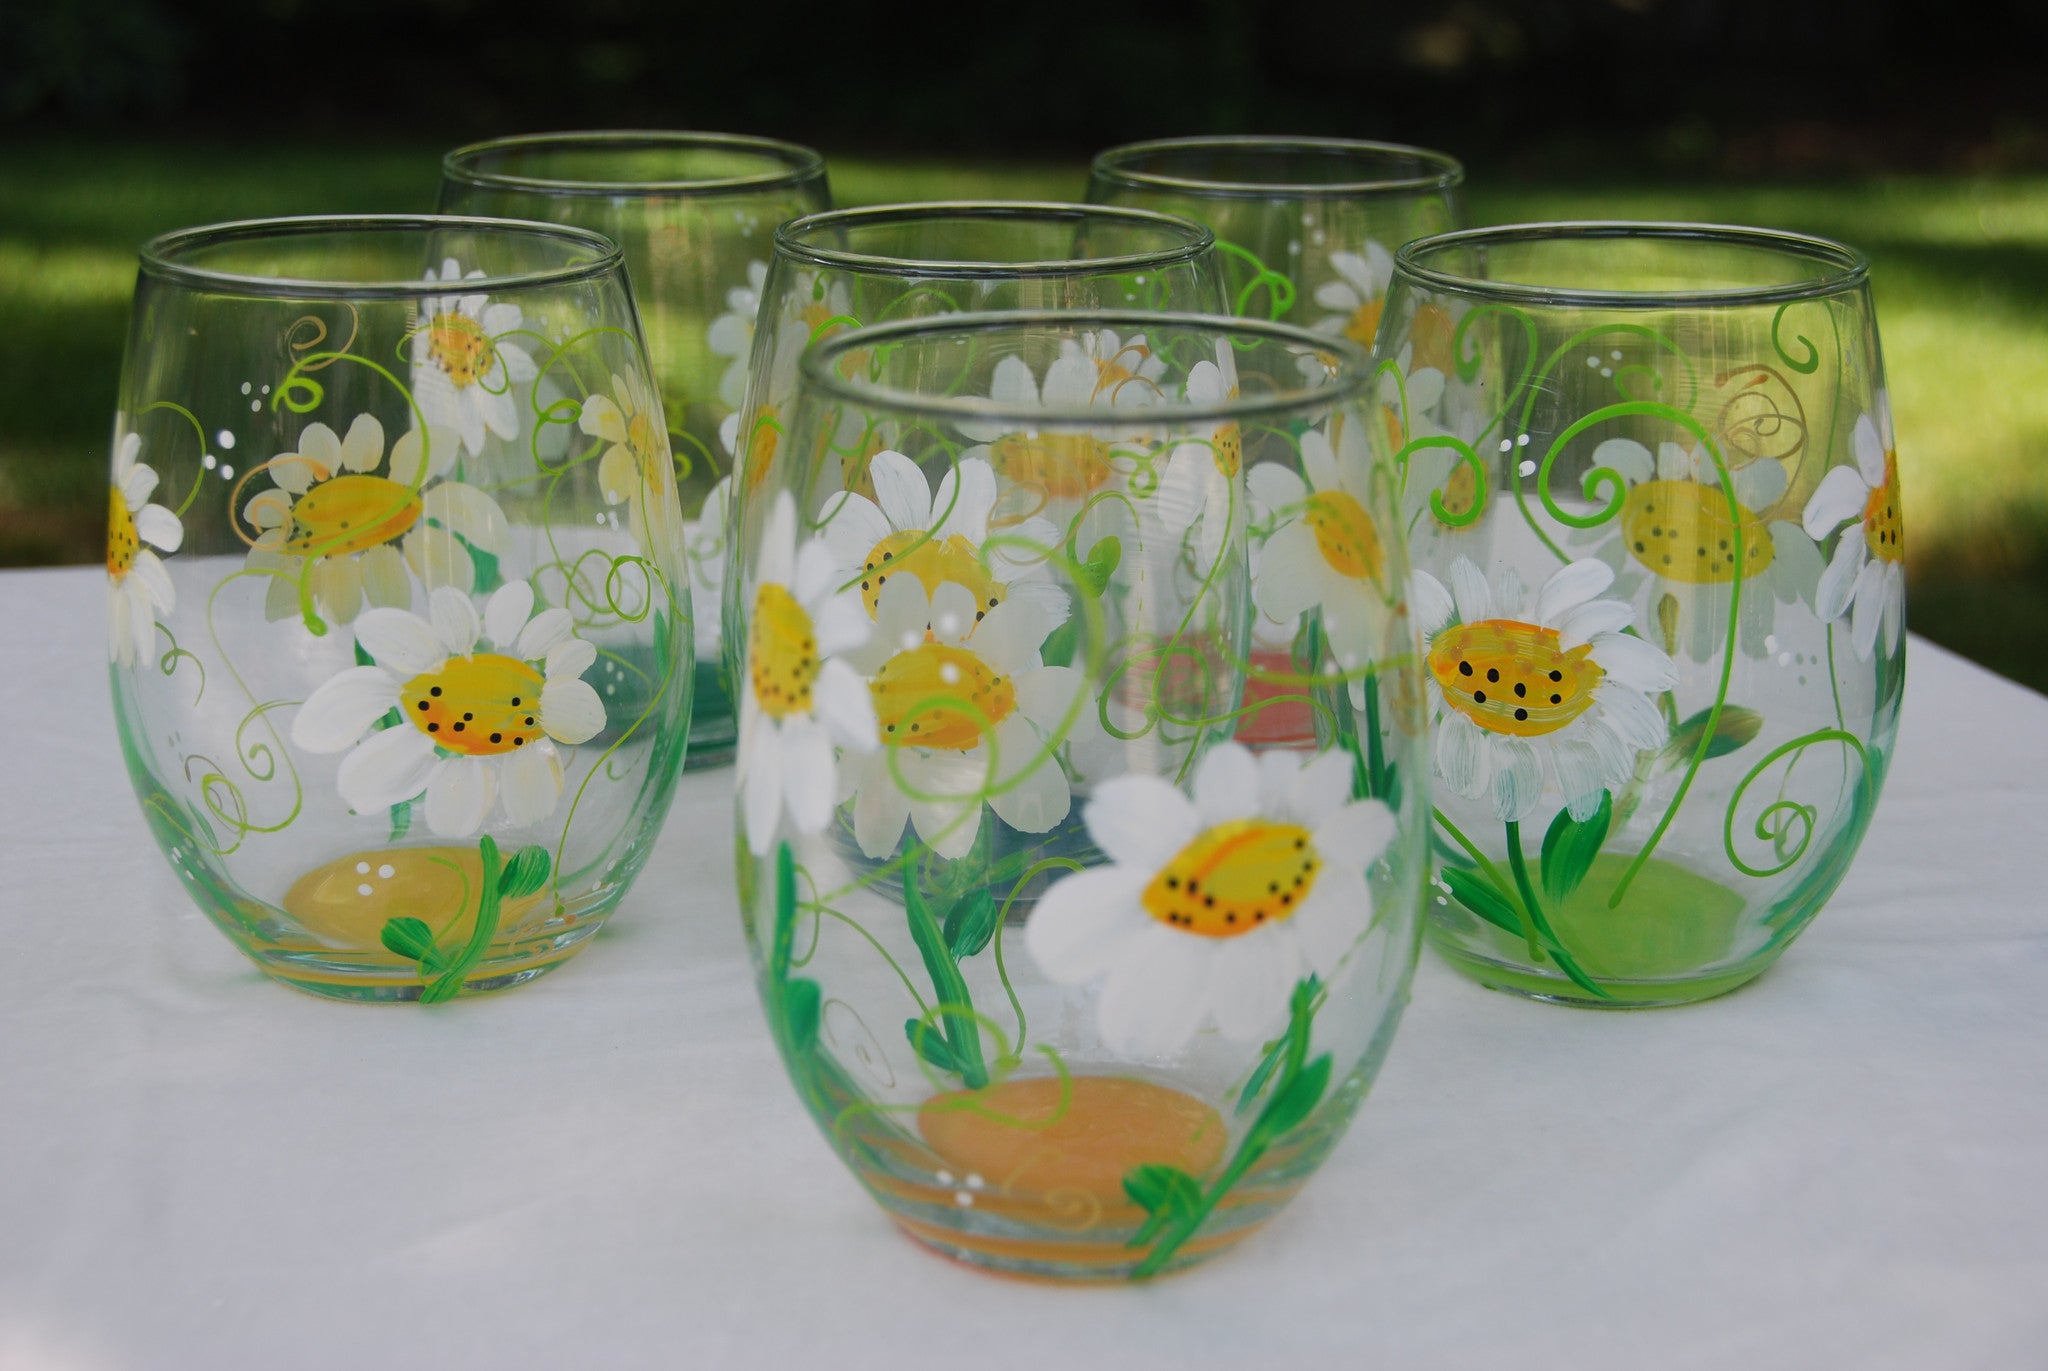 Daisy Painted Stemless Wine Glass